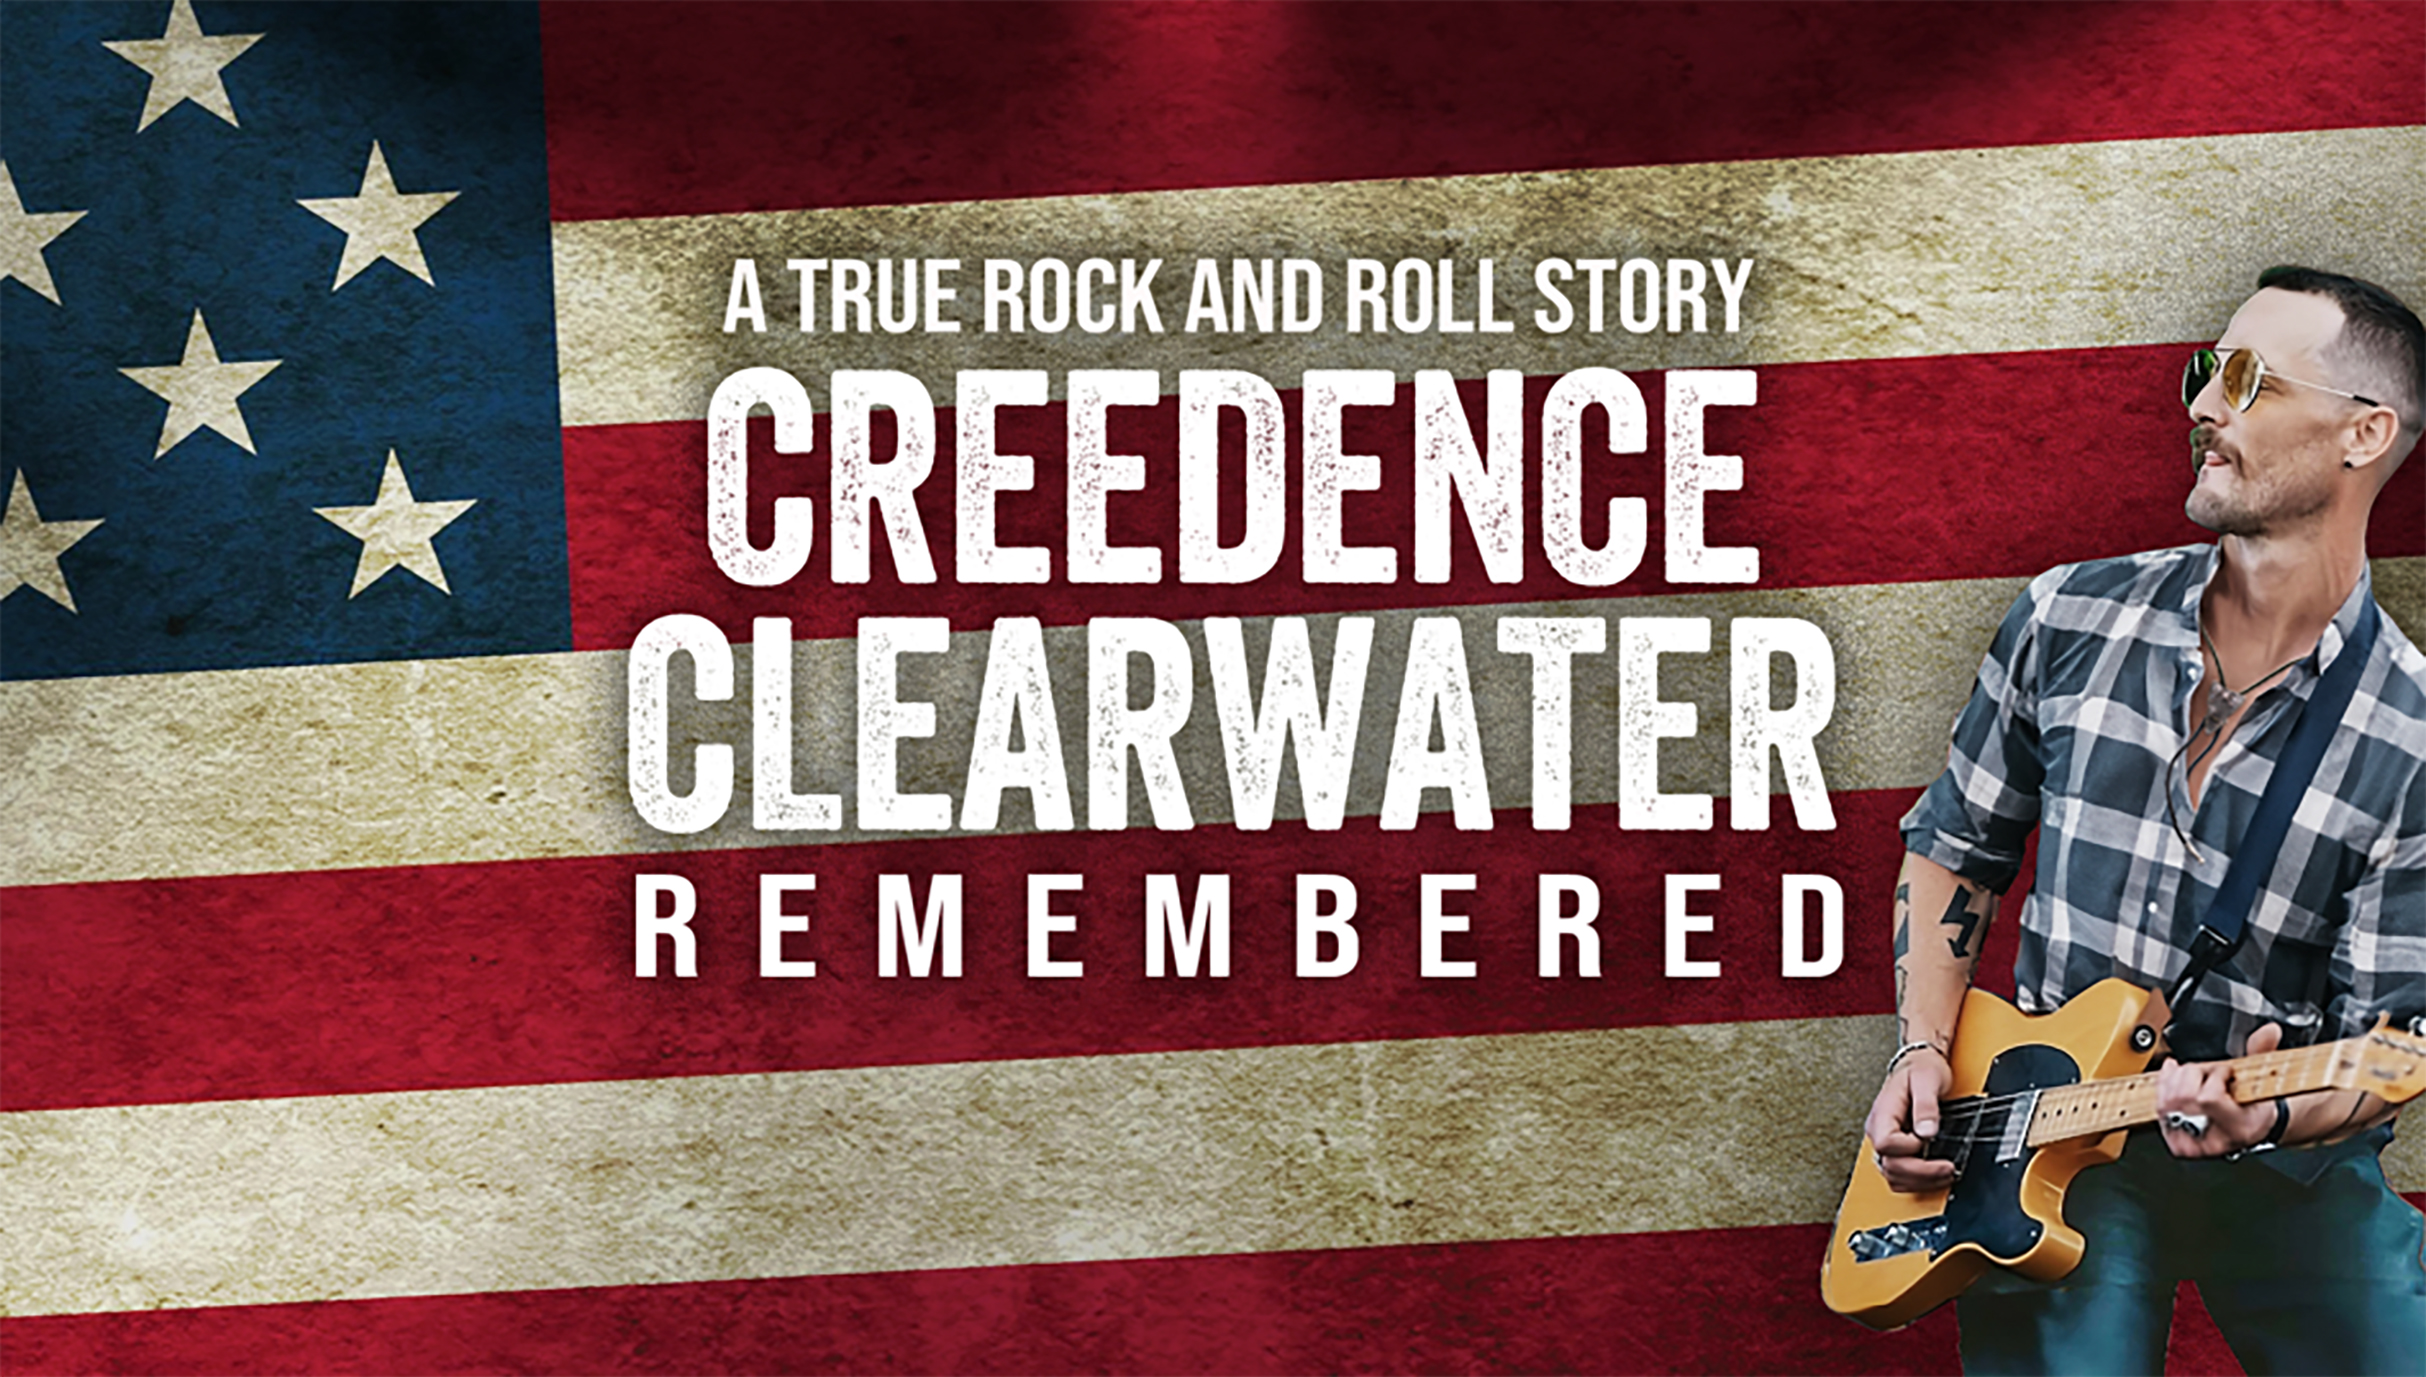 Creedence Clearwater Remembered